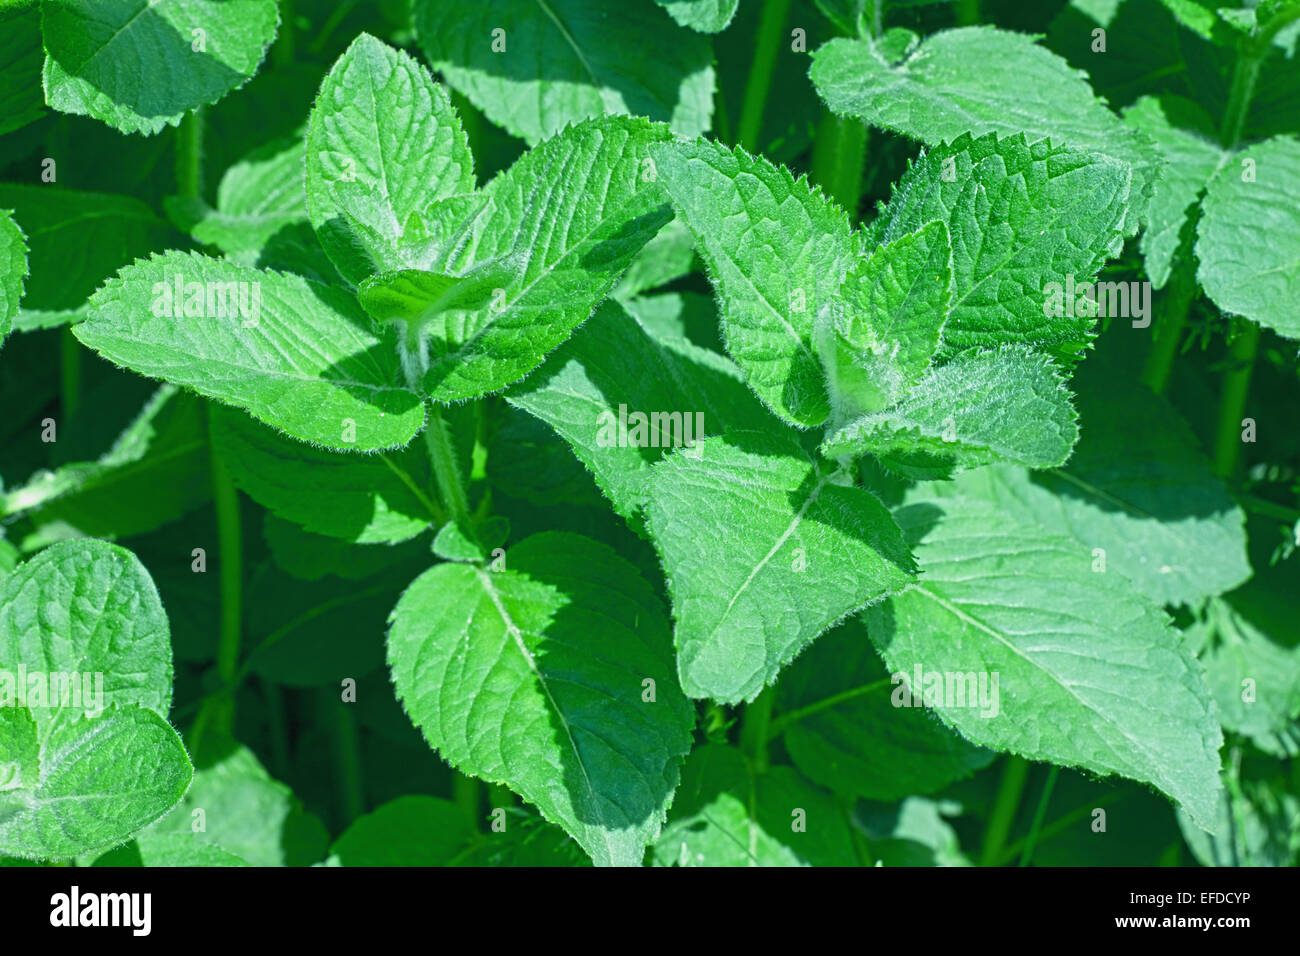 Closeup of fresh peppermint leaves Stock Photo